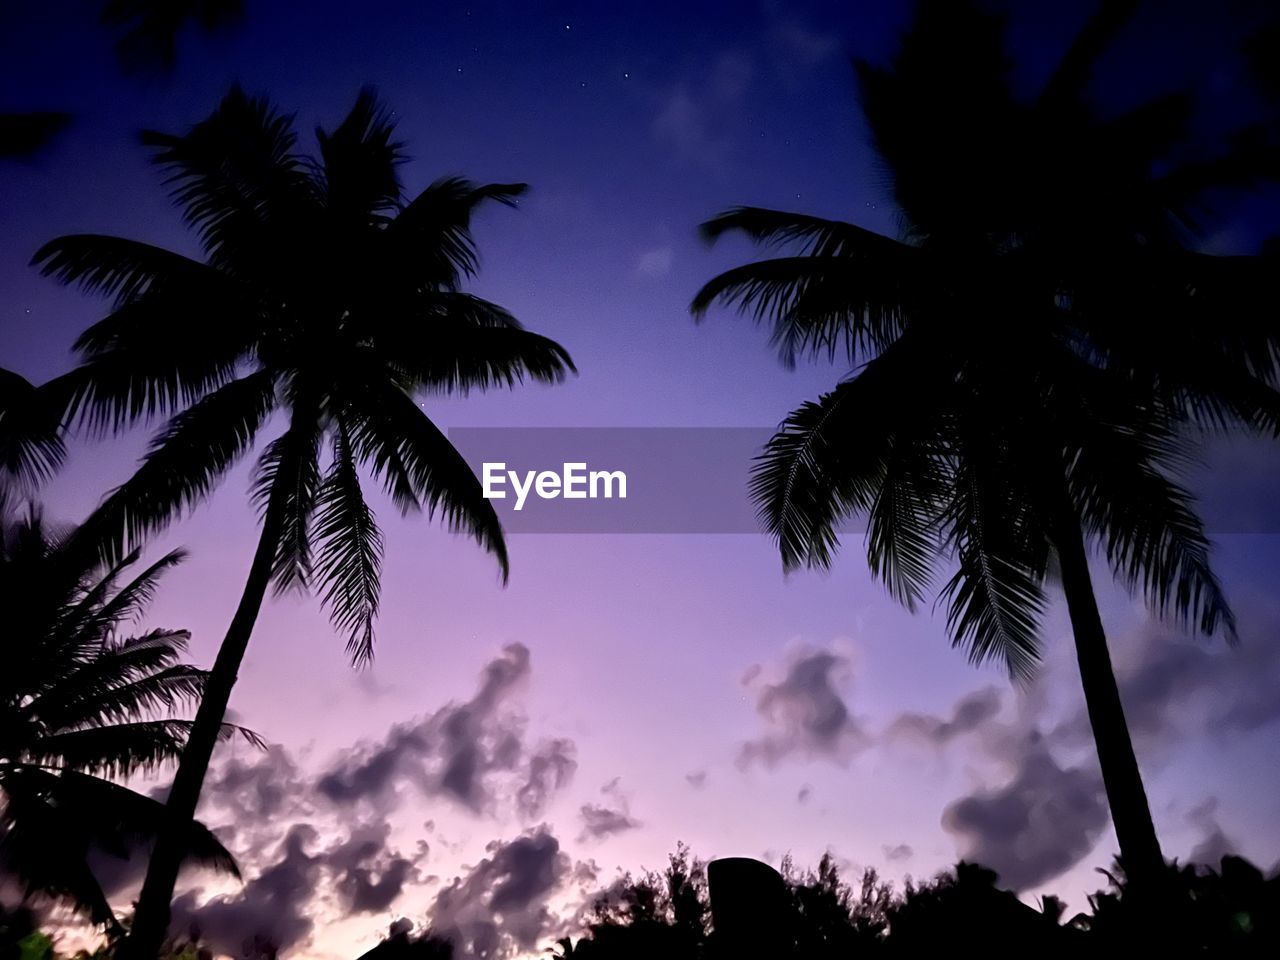 tree, tropical climate, palm tree, sky, silhouette, plant, beauty in nature, nature, scenics - nature, tranquility, cloud, sunset, coconut palm tree, dusk, tropical tree, idyllic, tranquil scene, low angle view, night, no people, land, leaf, travel destinations, environment, outdoors, holiday, darkness, vacation, trip, dramatic sky, growth, back lit, travel, palm leaf, evening, blue, tropics, island, dark, tourism